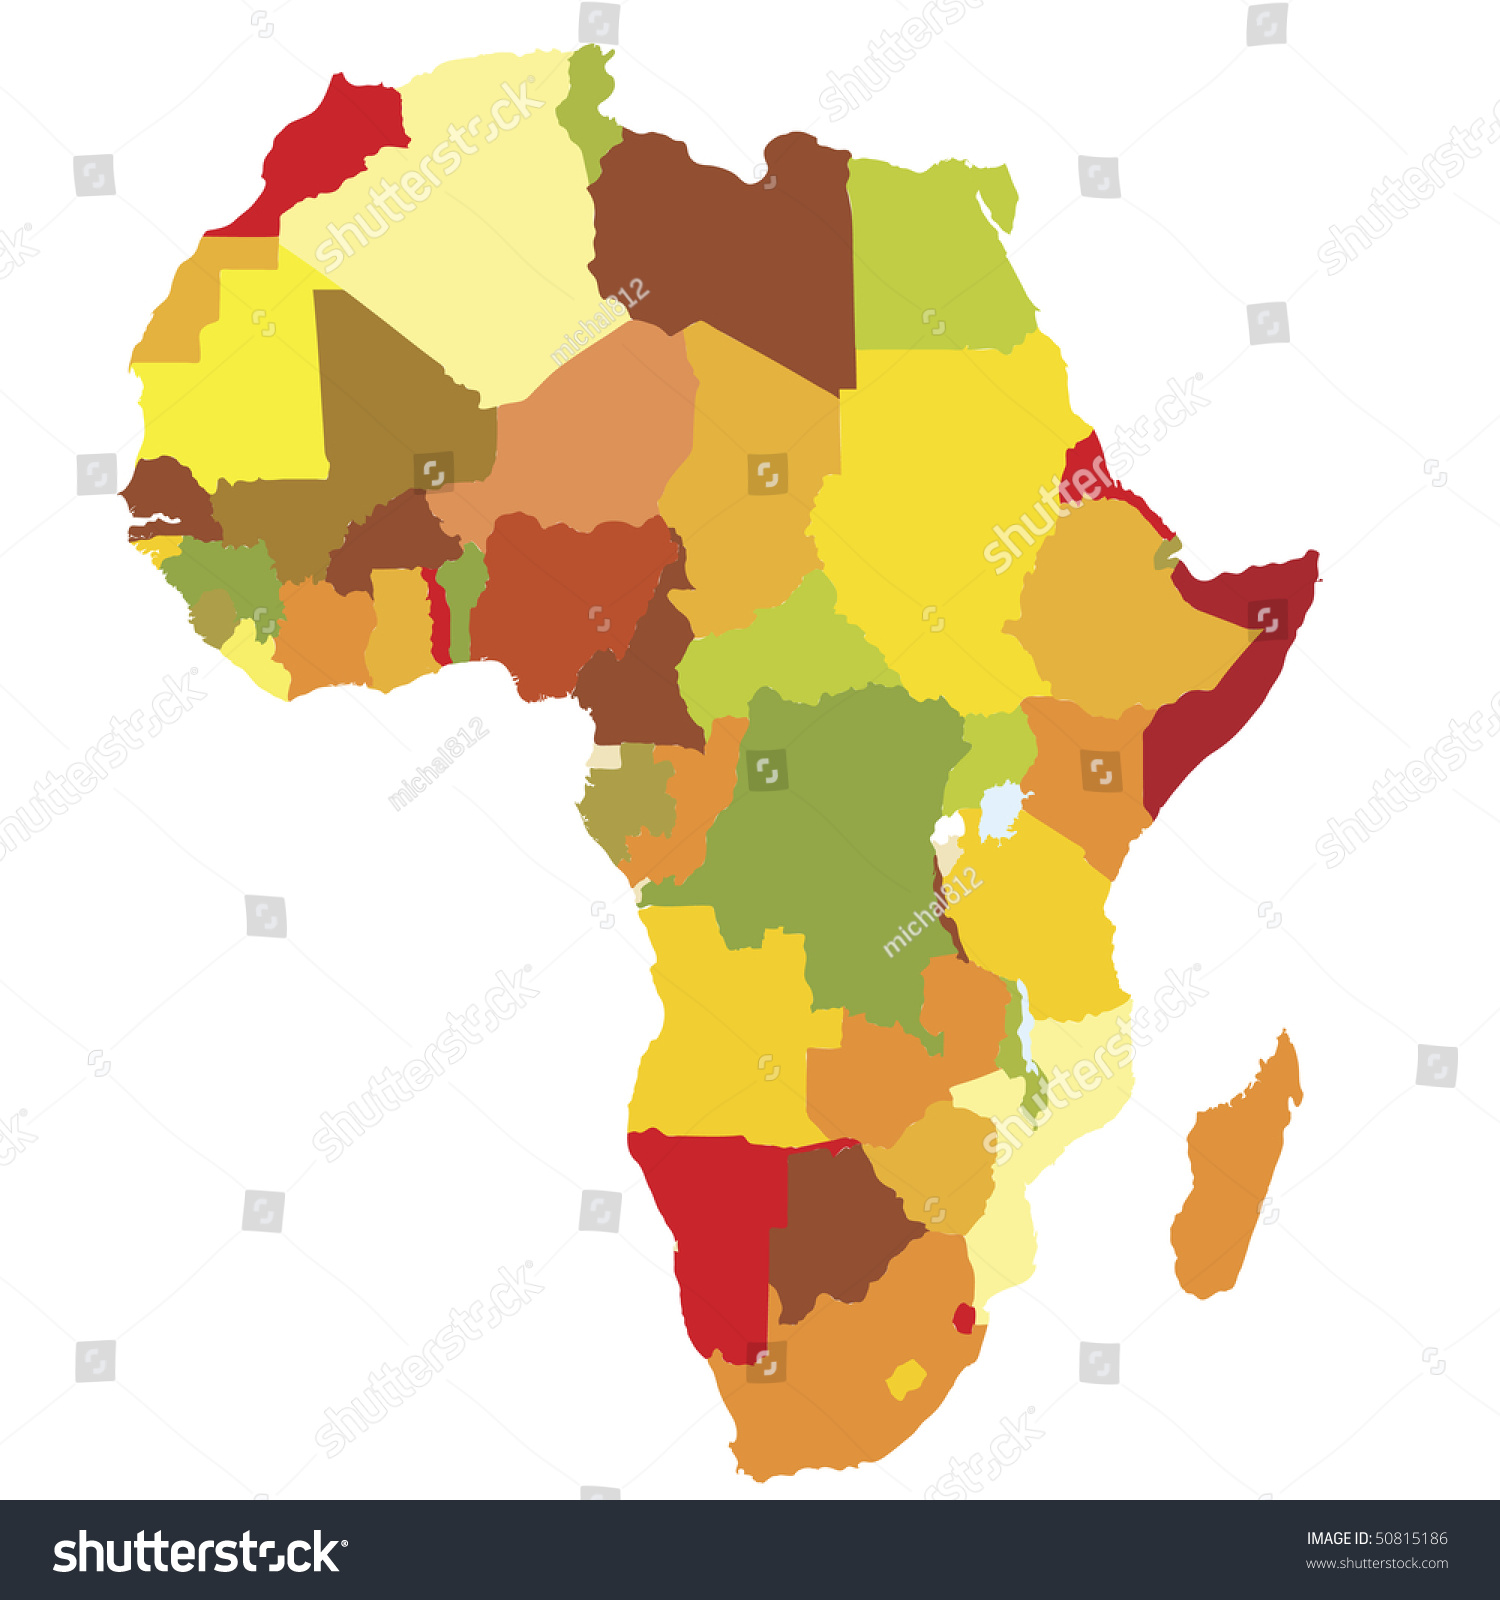 Political Map Of Africa With Country Territories Royalty Free Stock Vector 50815186 3566